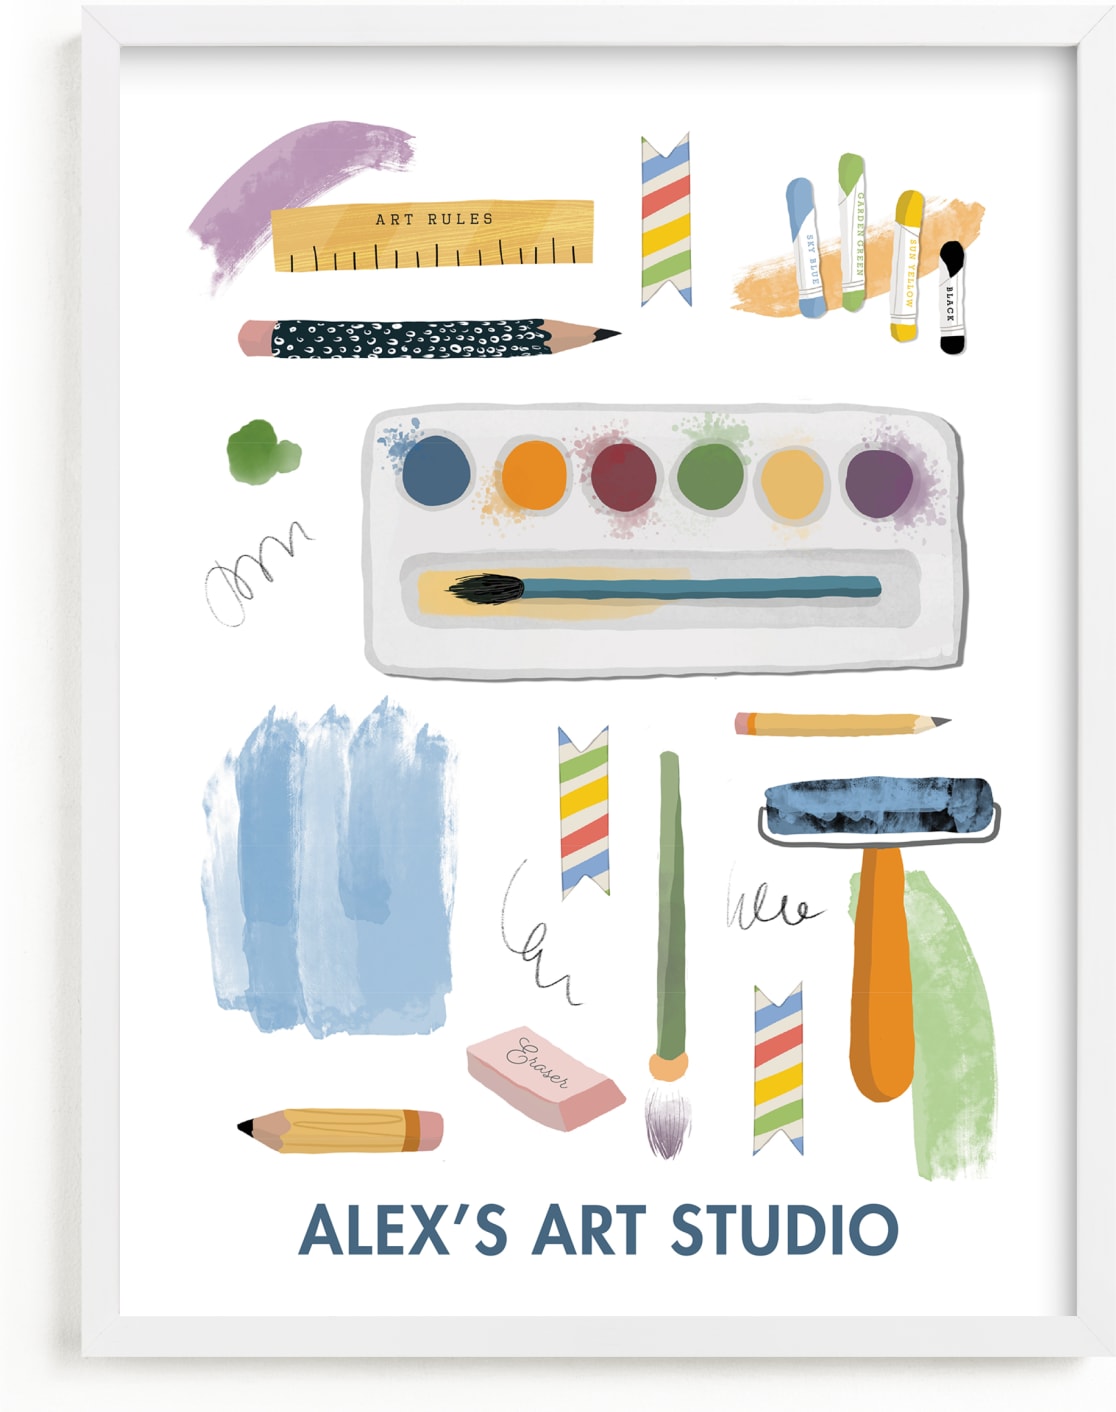 This is a colorful personalized art for kid by Naava Katz called Creative Tools.